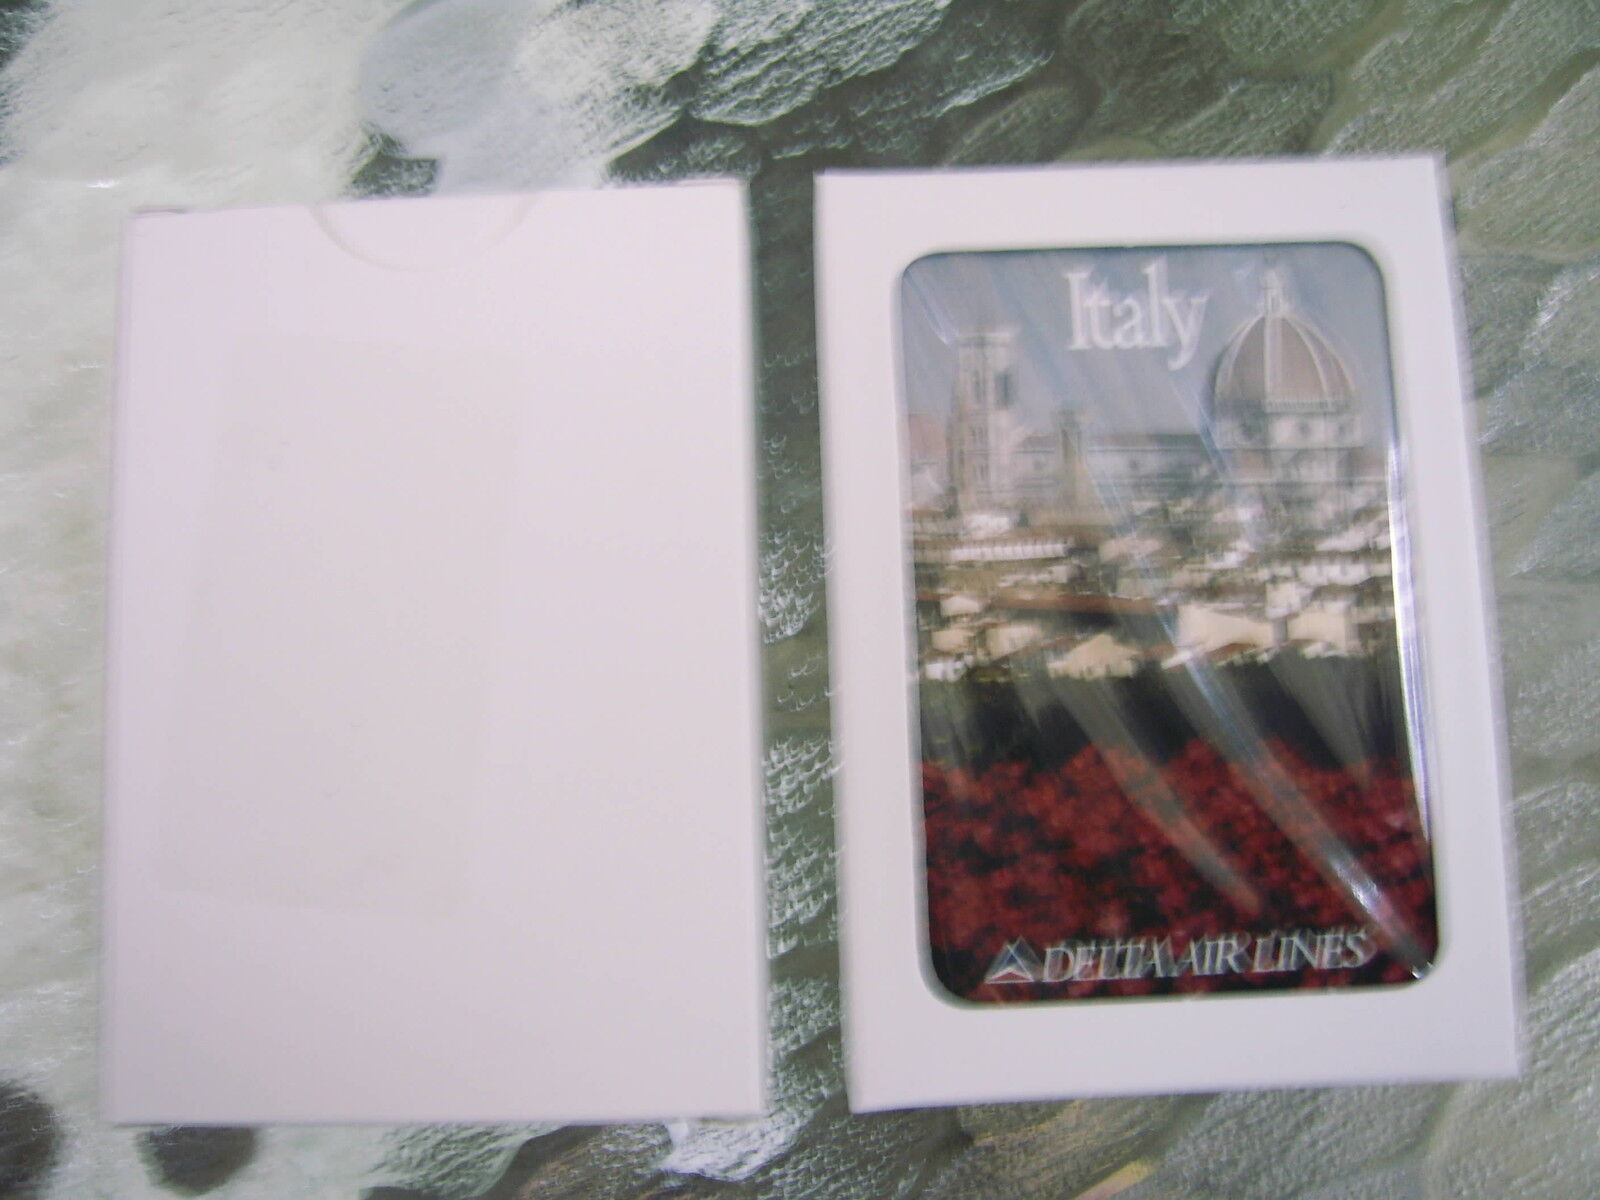 DELTA AIR LINES DECK OF CARD - ITALY - NEW IN ORIGINAL PACKAGE     